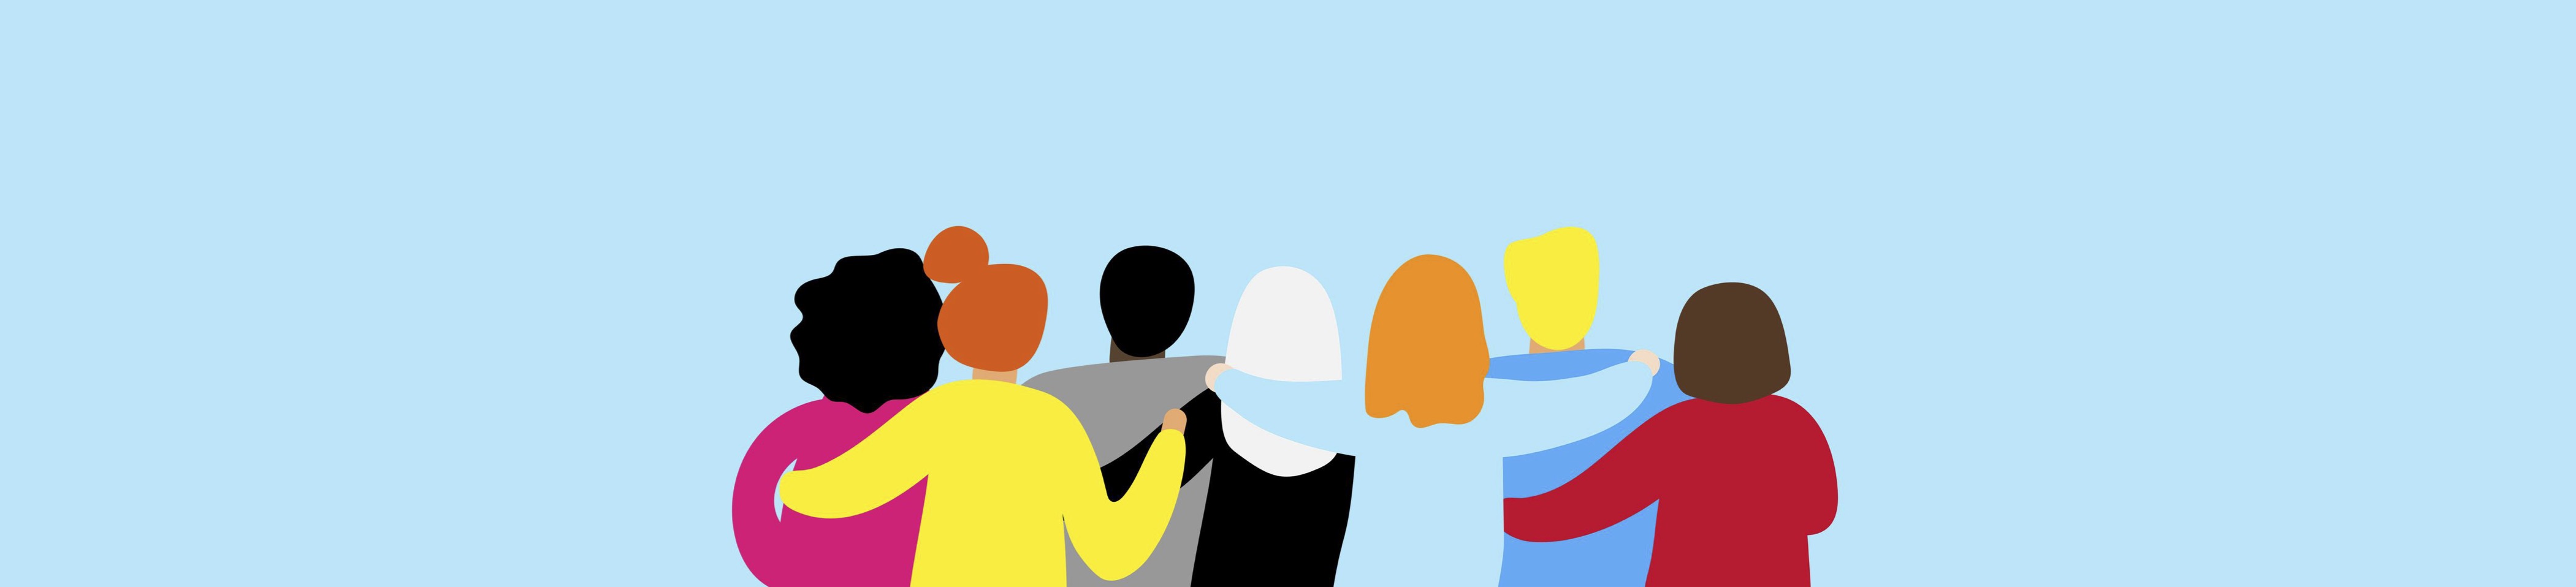 An illustration of a diverse group of people, hugging together with their backs turned away. 